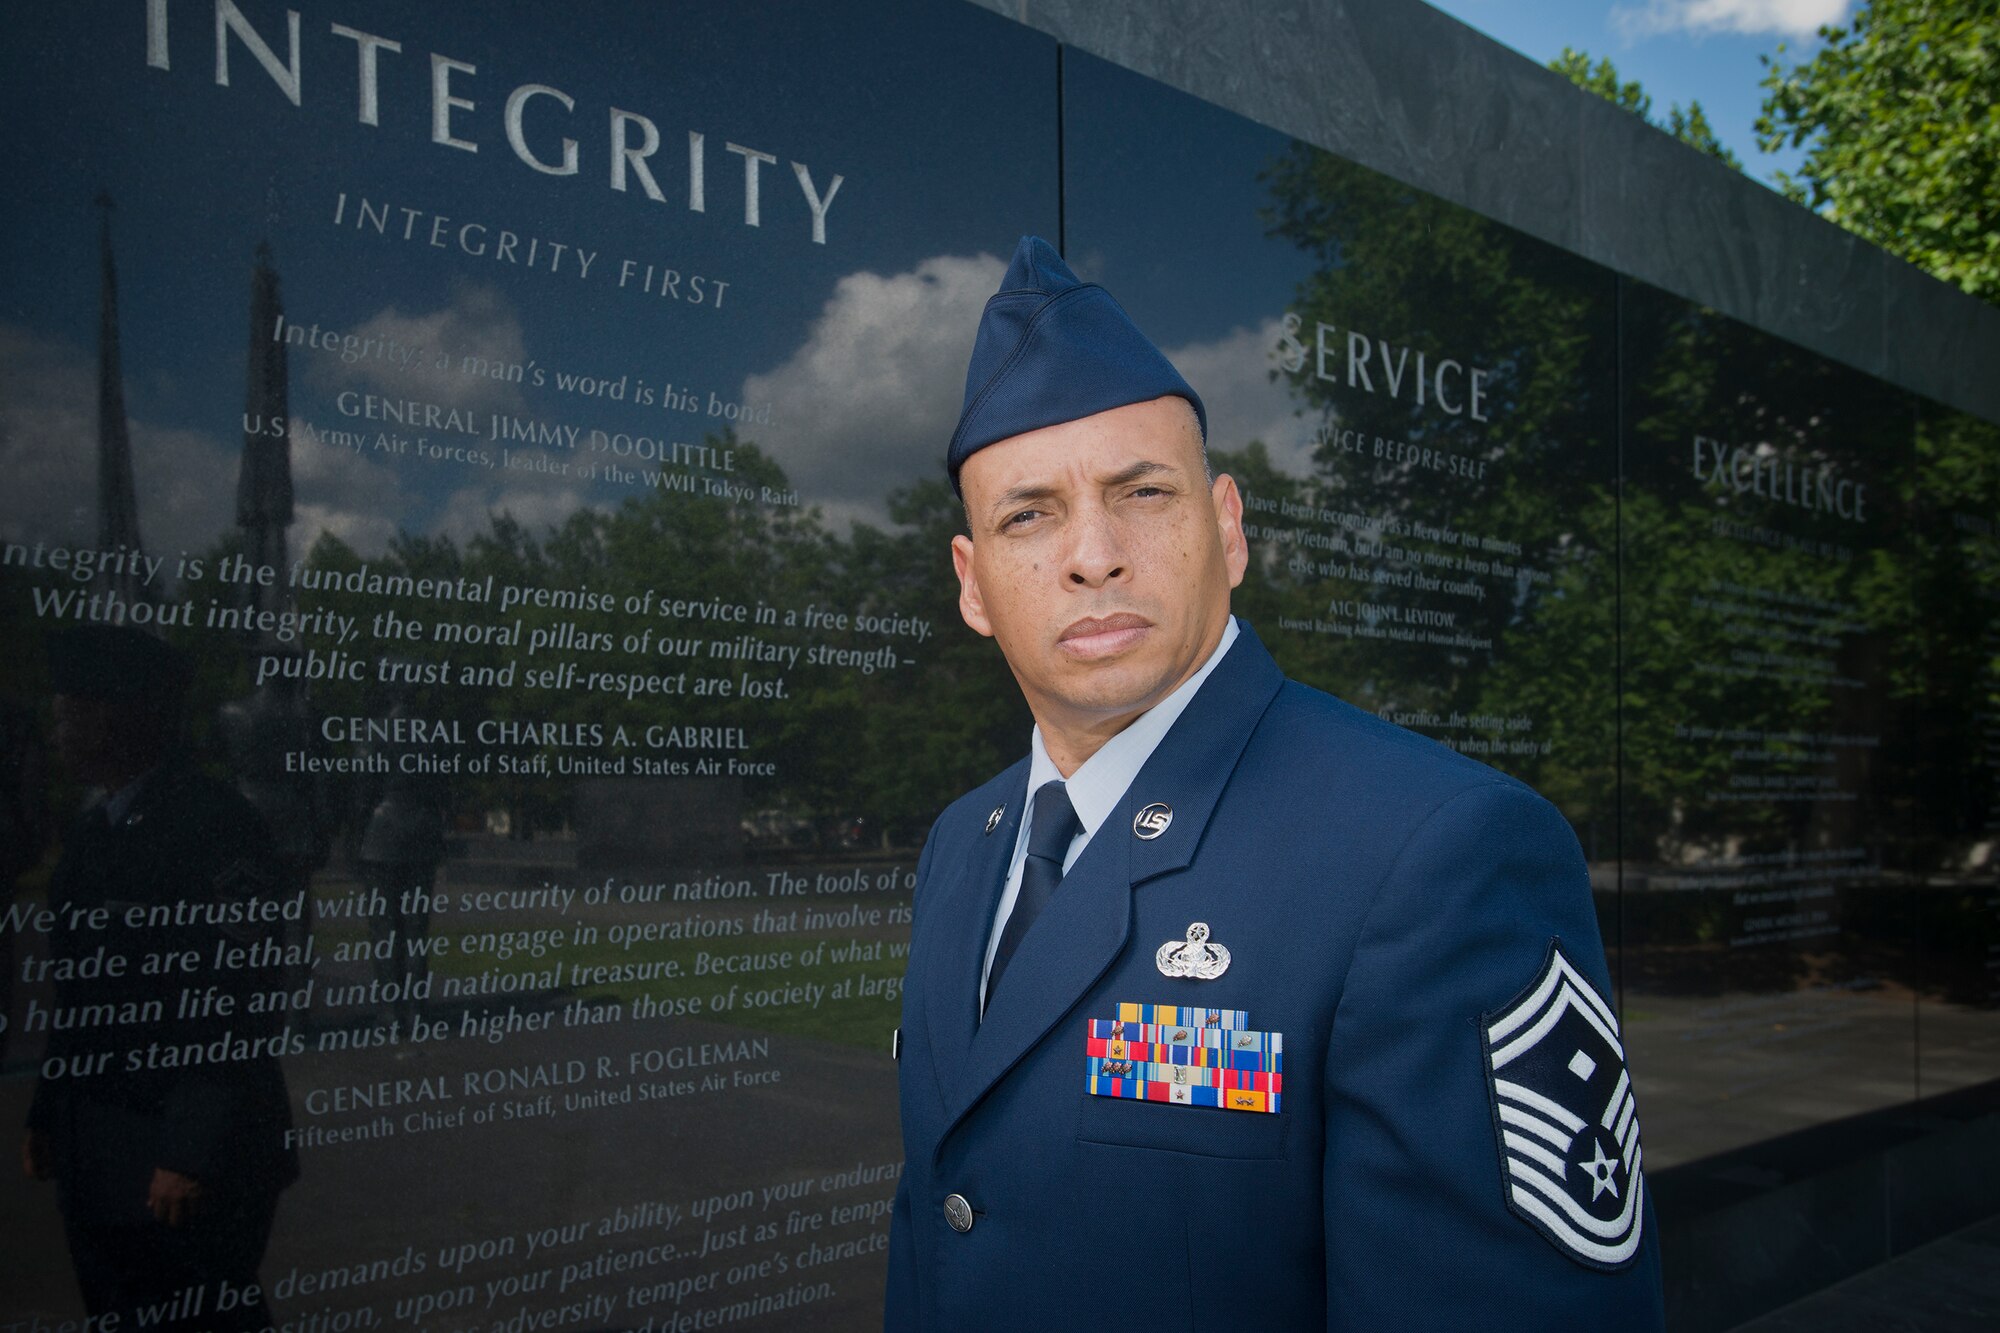 Senior Master Sgt. Jack N. Minaya, 2016 Air National Guard Outstanding First Sergeant of the Year, poses for a photo at the U.S. Air Force Memorial in Washington, D.C., June 8, 2016. (Air National Guard photo by Master Sgt. Marvin R. Preston/Released)